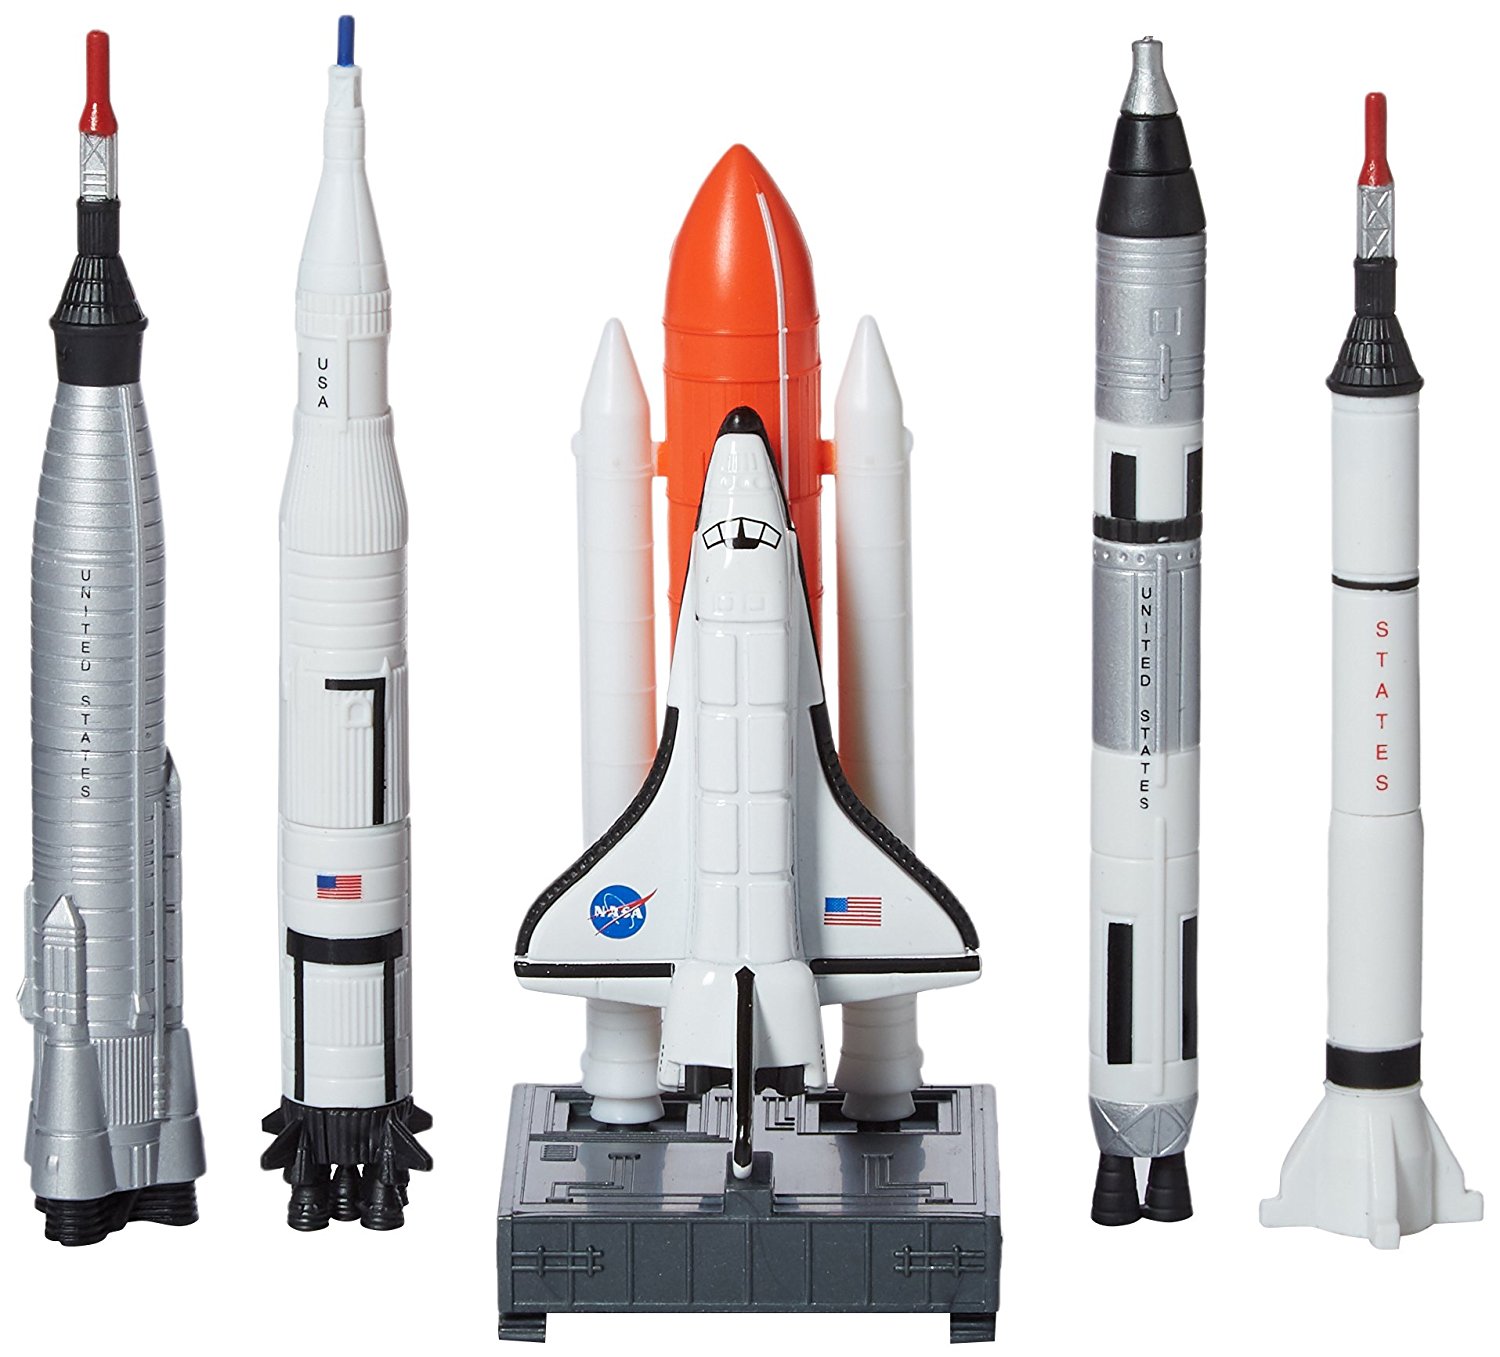 Amazon.com: Space Shuttle & Rockets Pack: Toys & Games